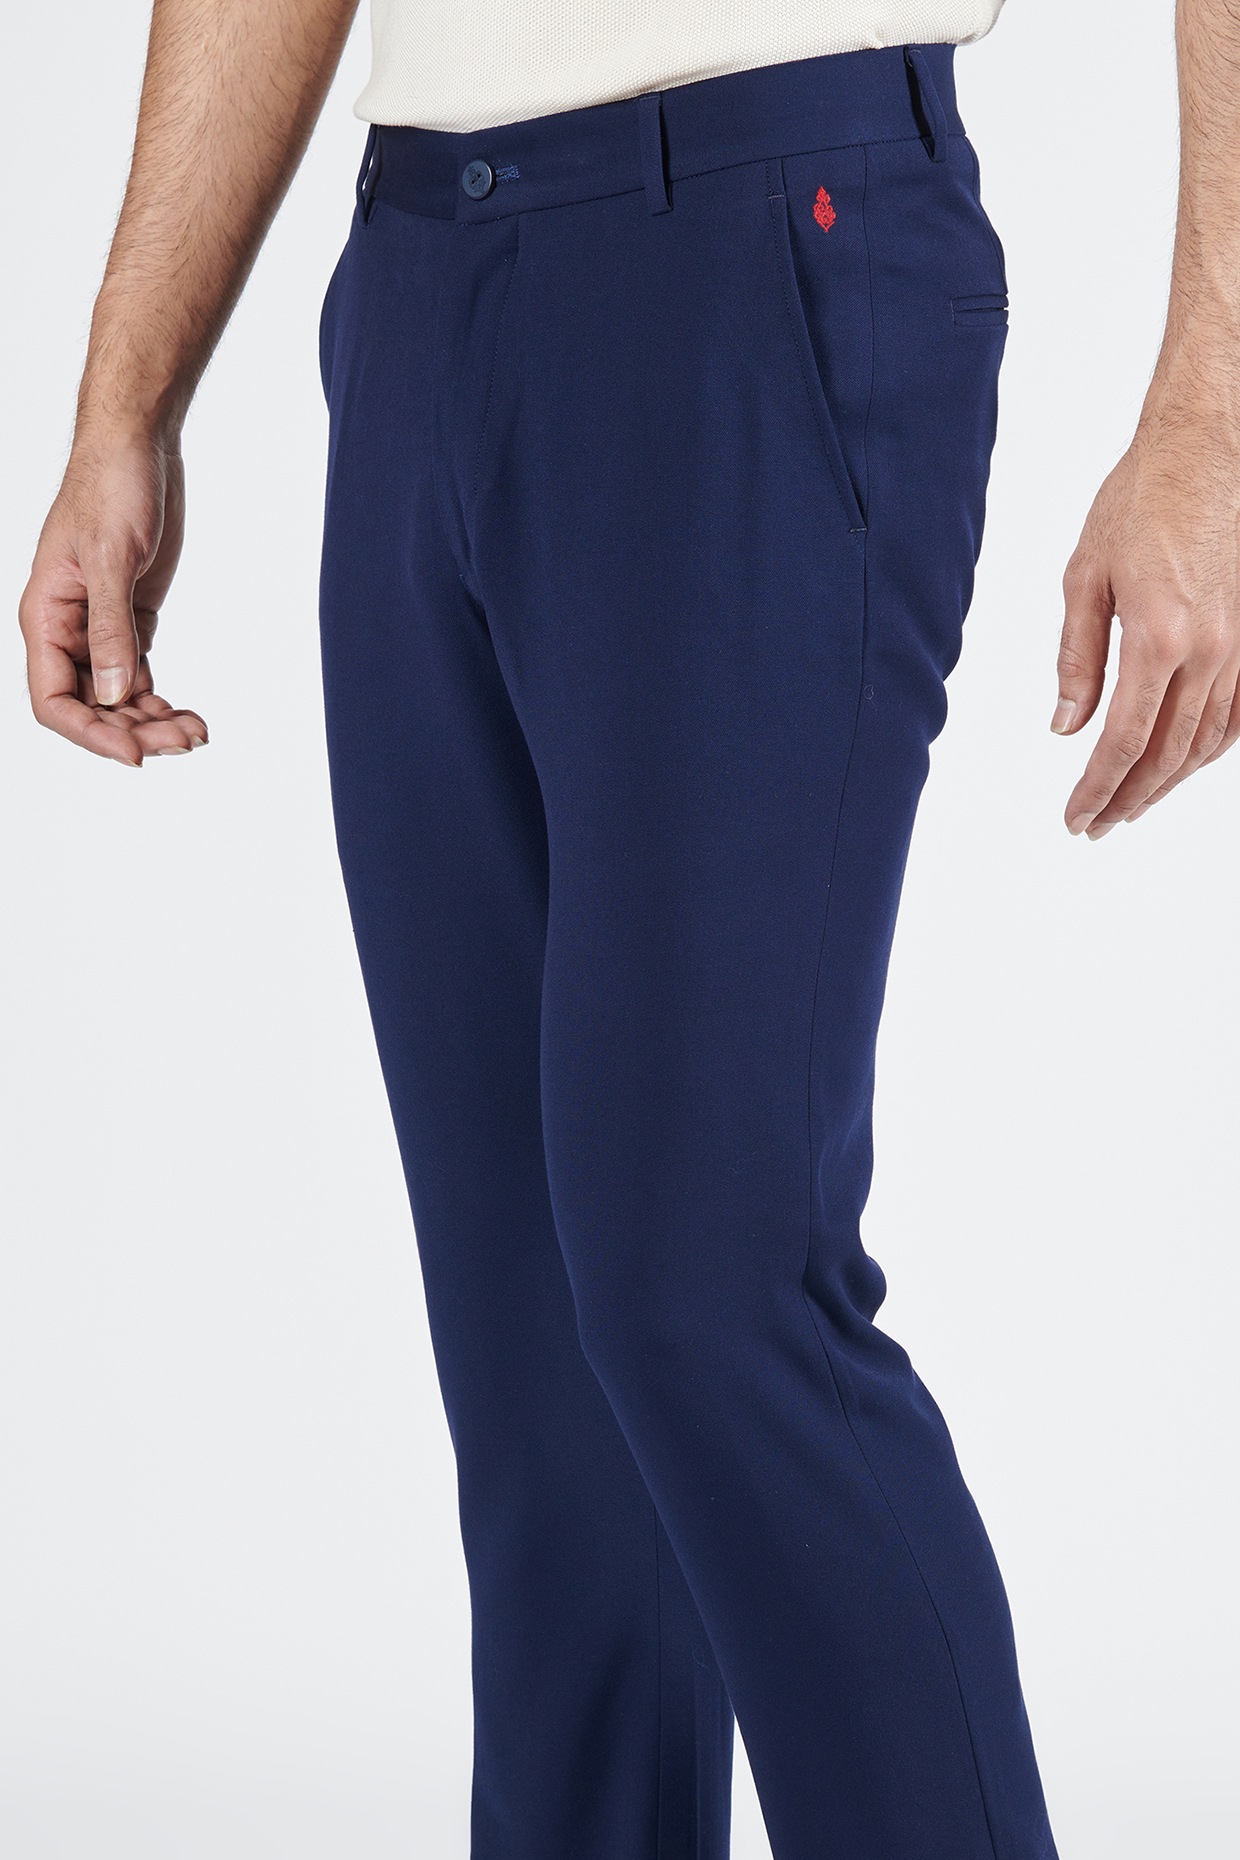 Louis Philippe Trousers & Chinos, Louis Philippe Brown Trousers for Men at  Louisphilippe.com